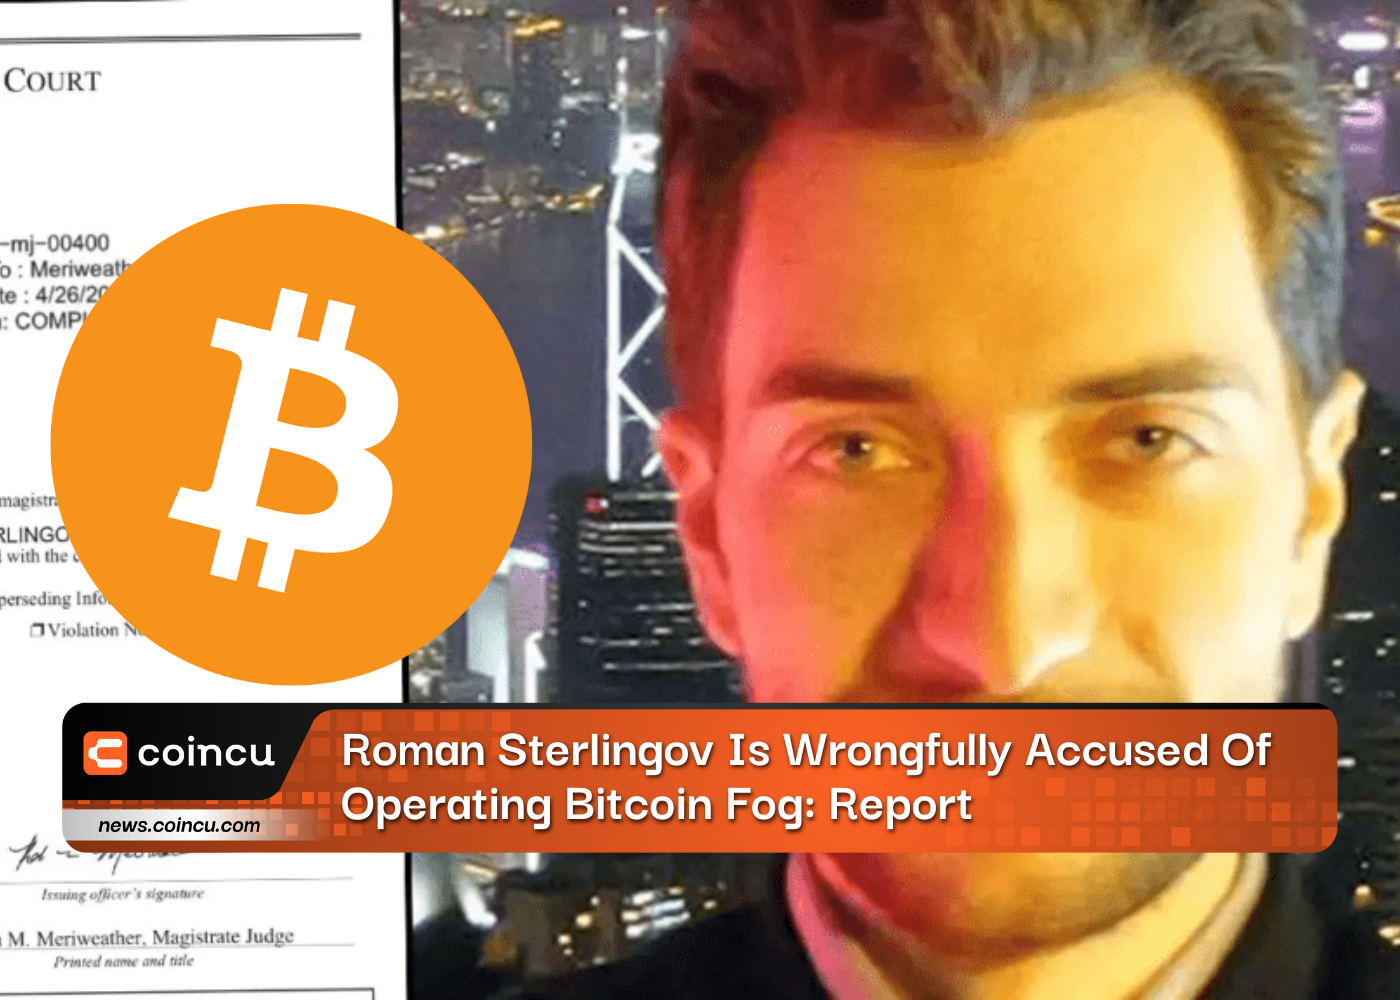 Roman Sterlingov Is Wrongfully Accused Of Operating Bitcoin Fog: Report